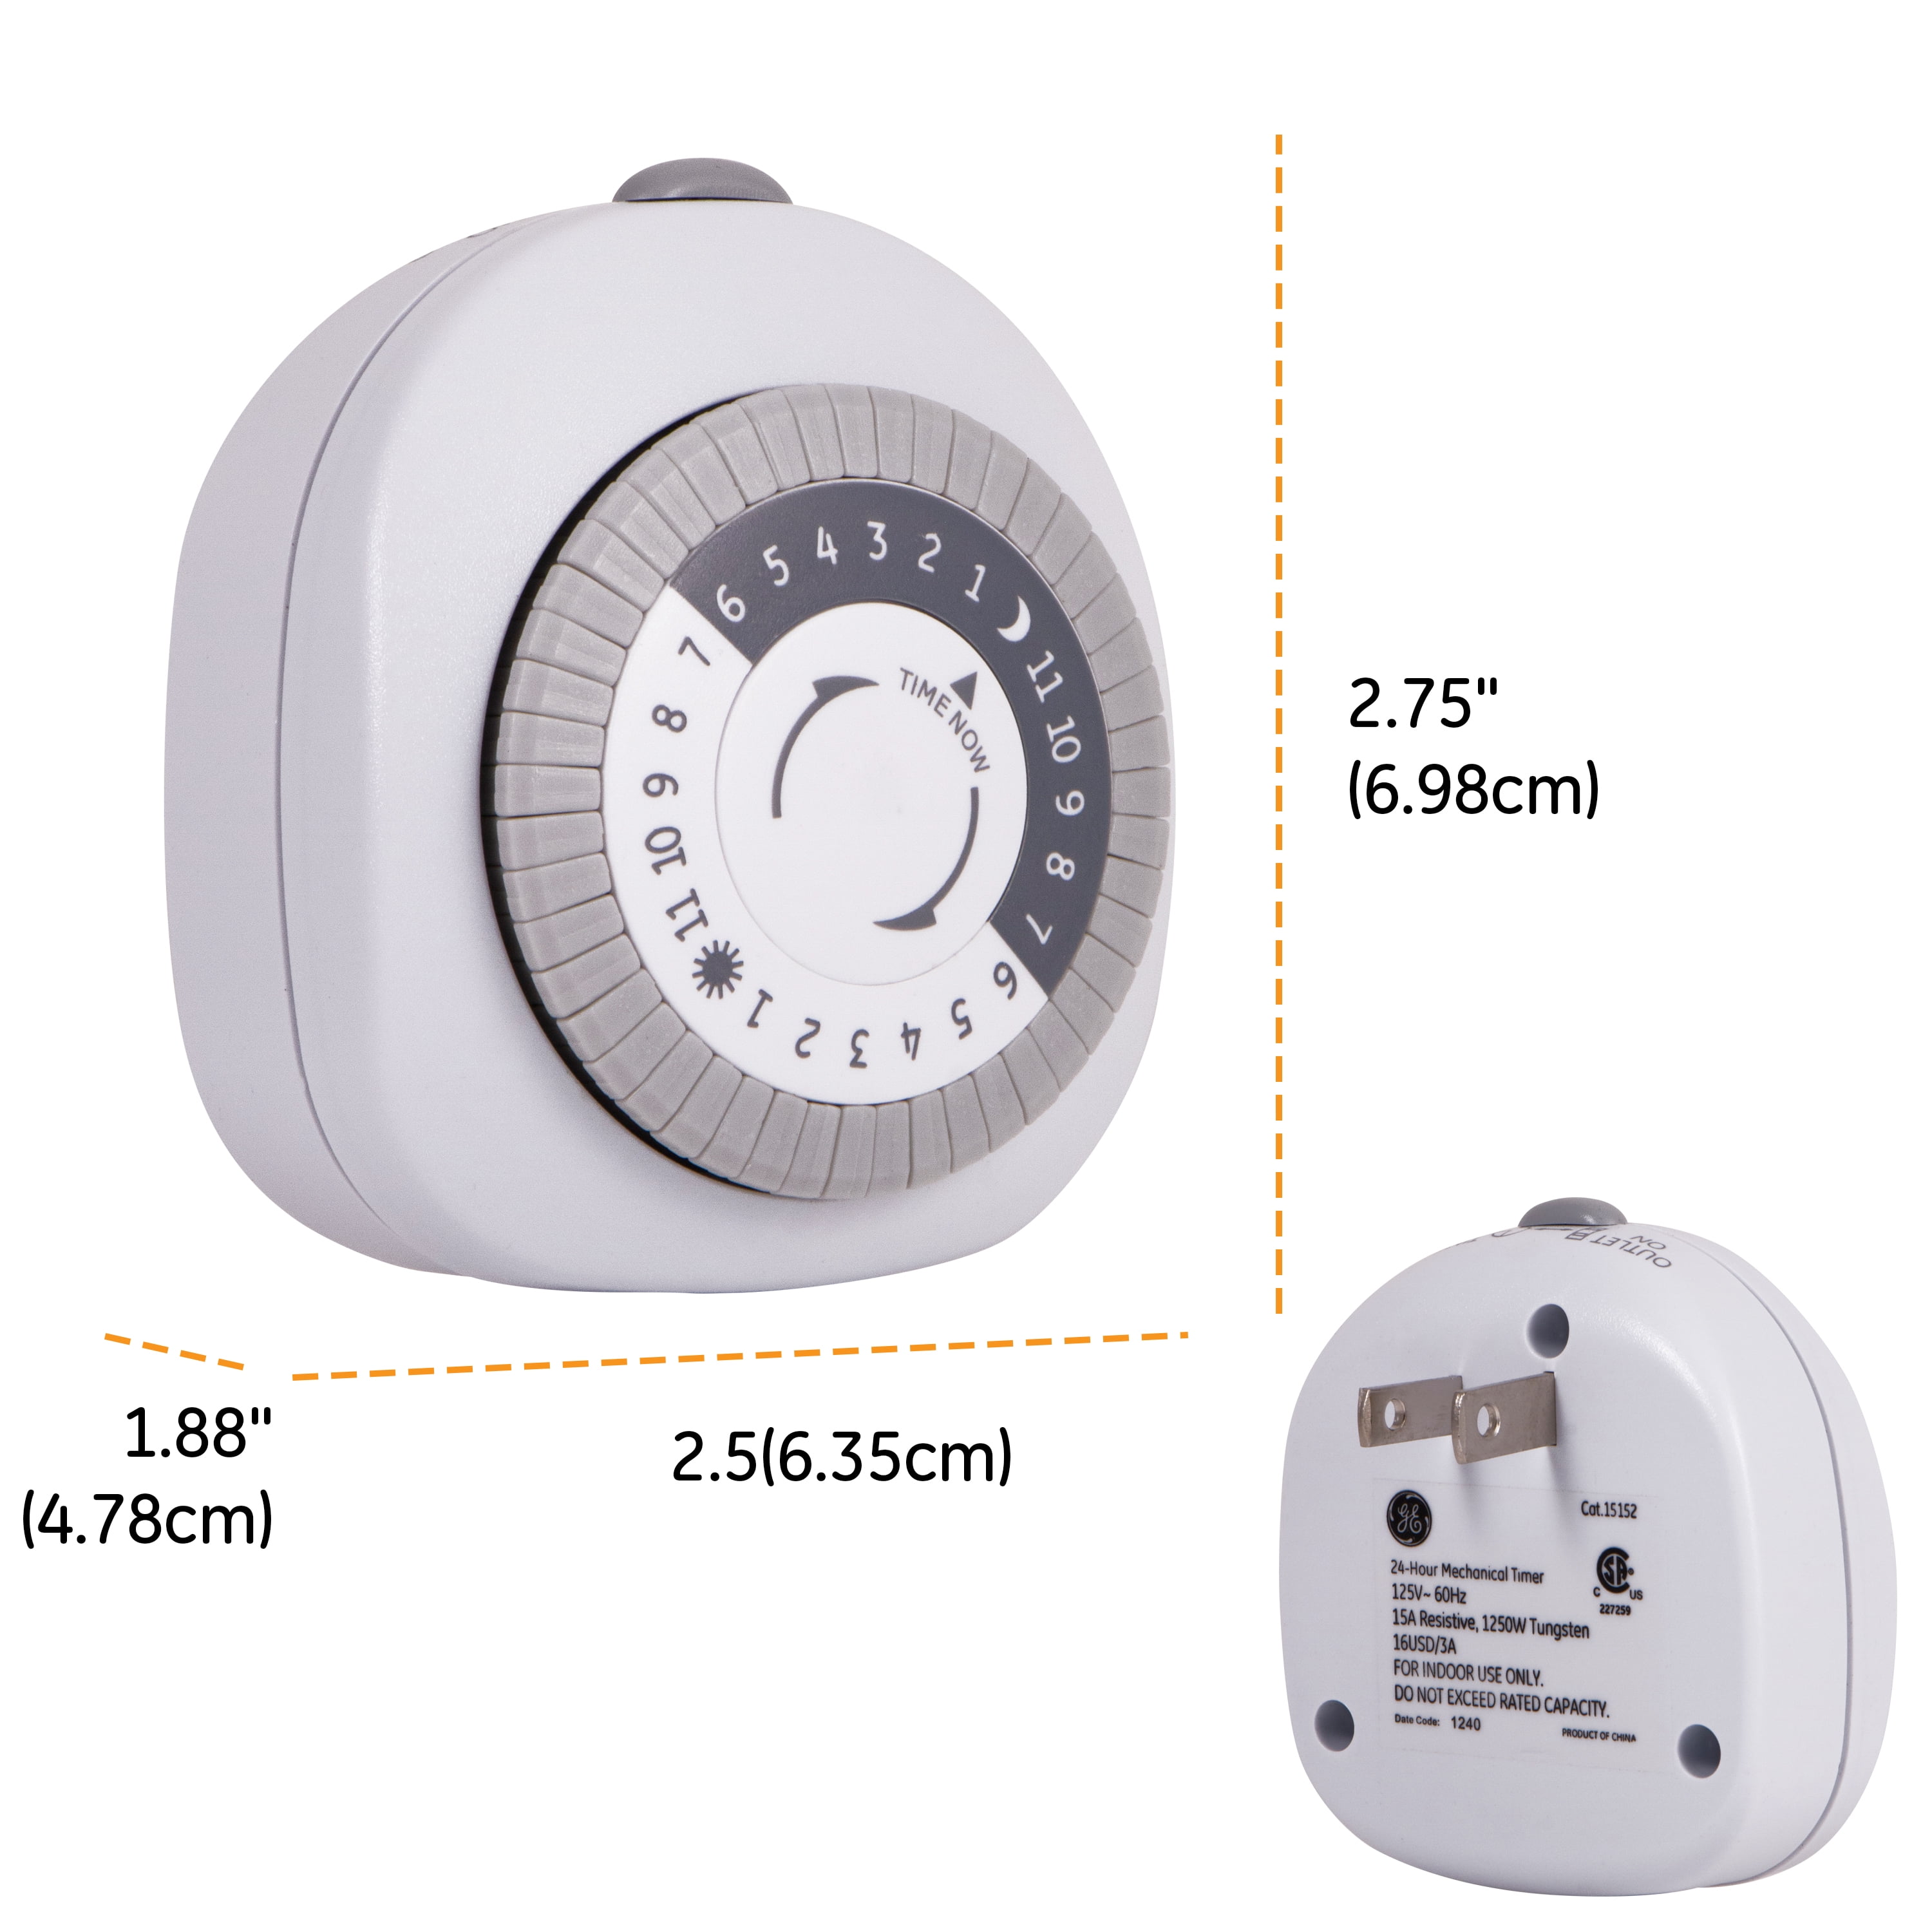 GE 24-Hour Heavy Duty Indoor Plug-In Mechanical Timer, 1 Grounded Outlet,  30 Minute Intervals, Daily On/Off Cycle, for Lamps, Portable Fans, Seasonal